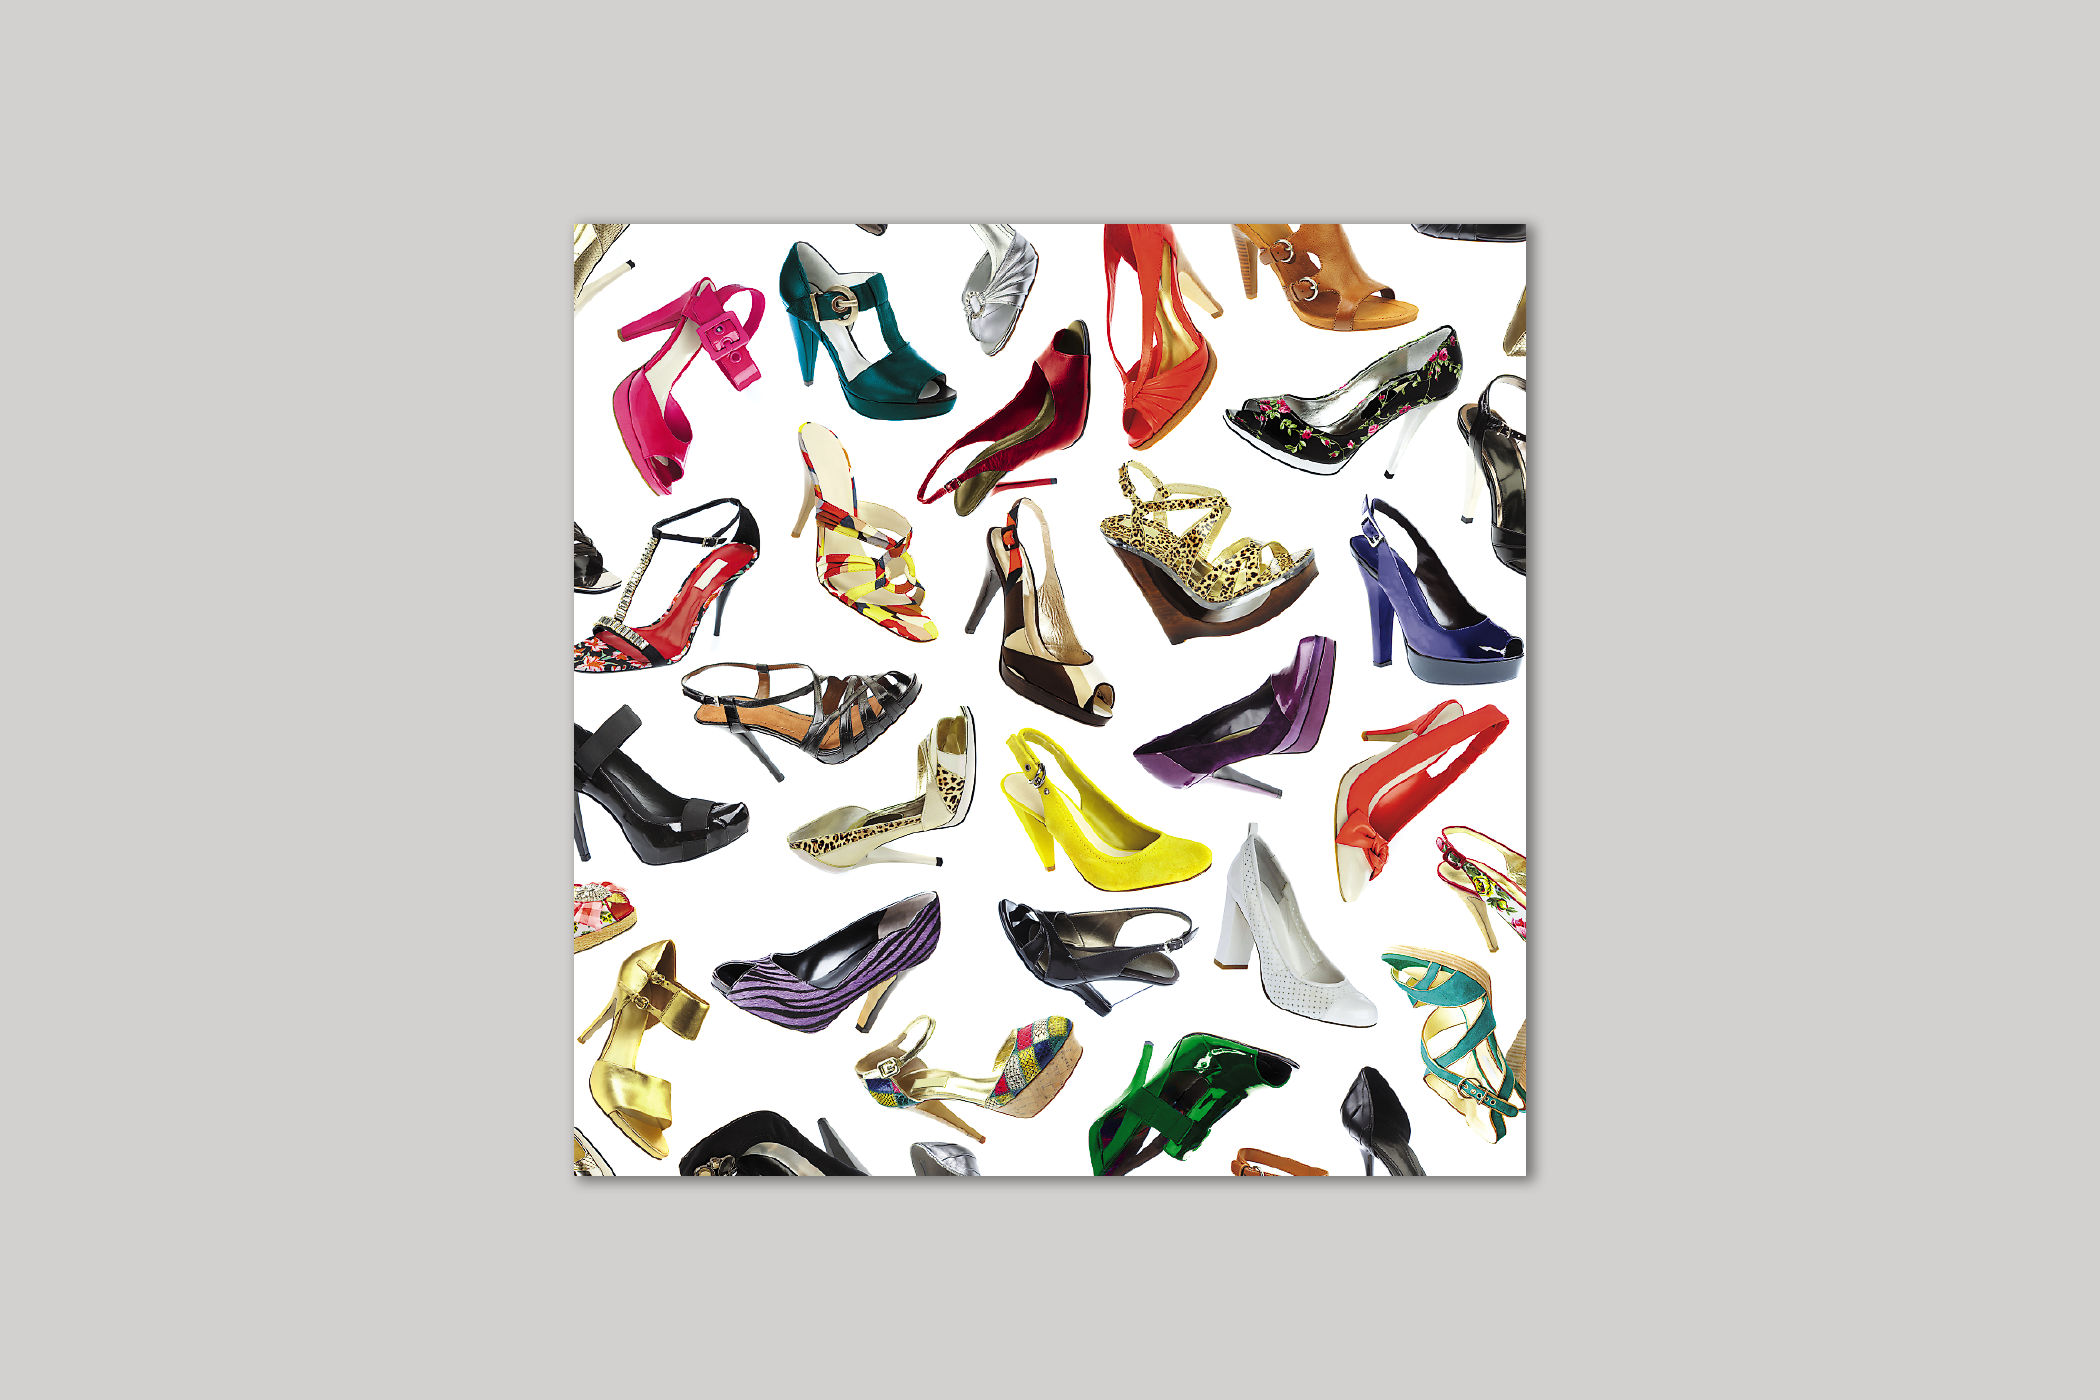 High Heels from Exposure range of photographic cards by Icon.